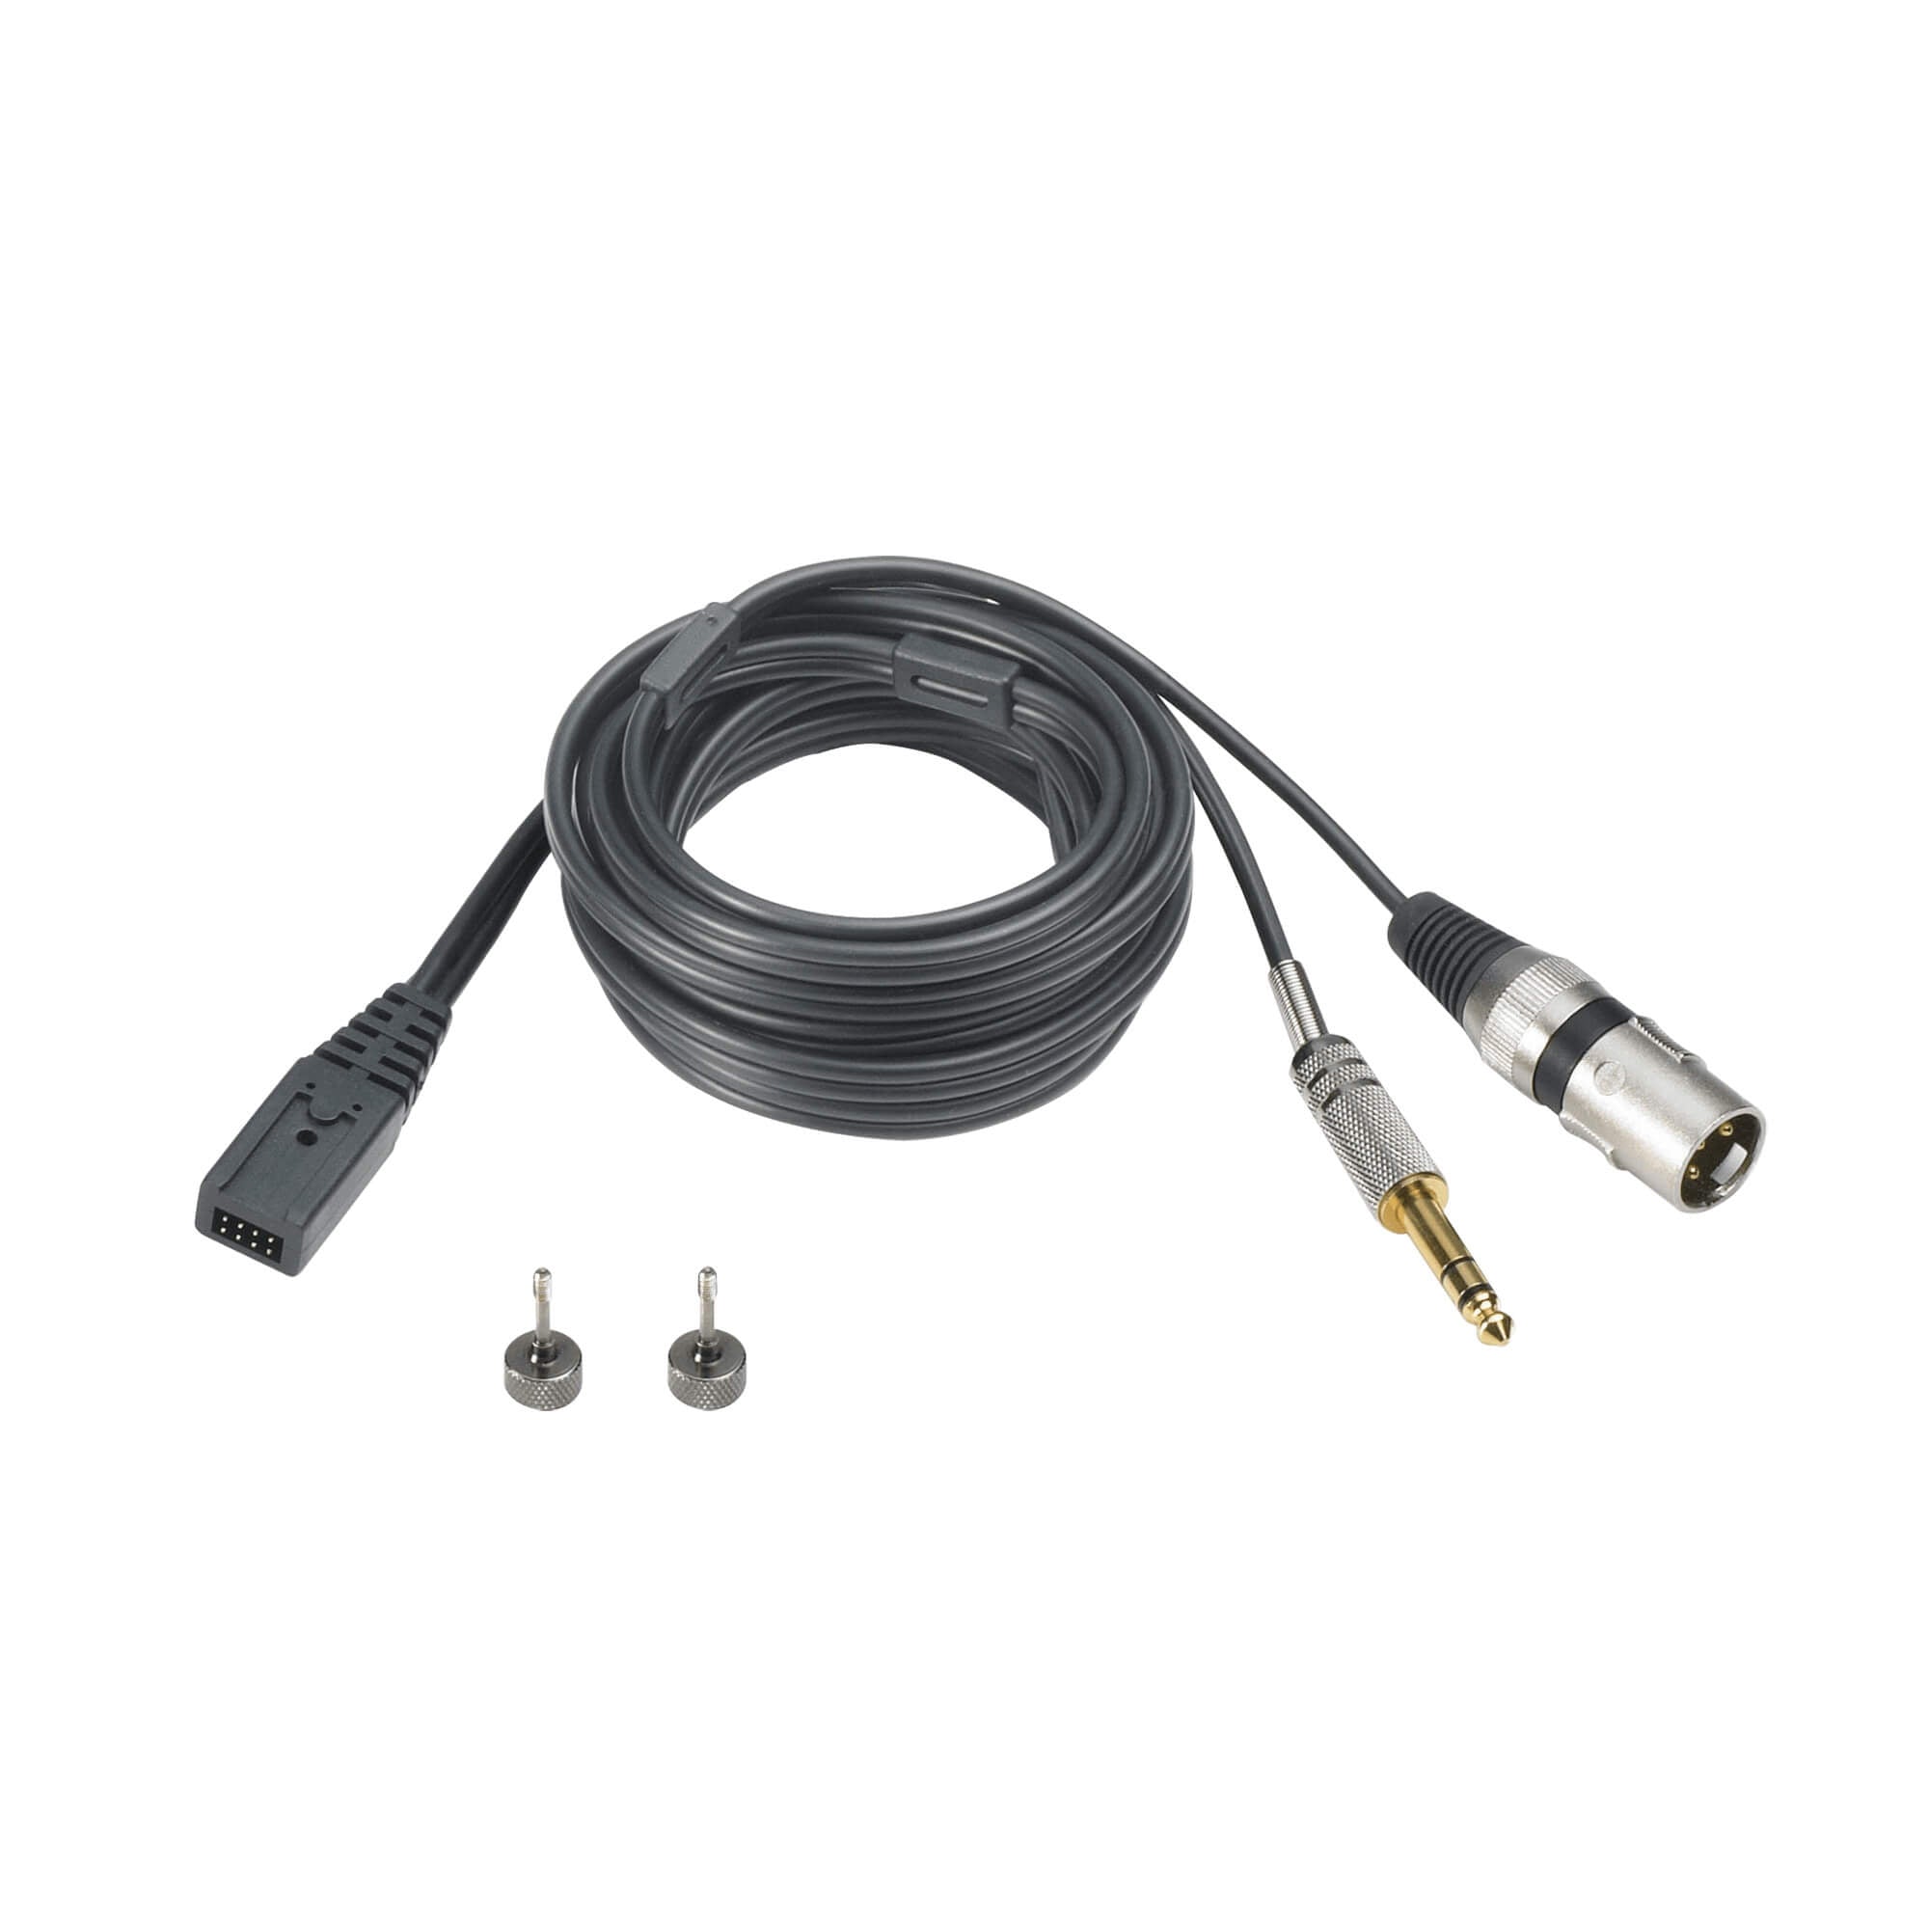 Audio-Technica BPHS1 - Broadcast Stereo Headset, 3-pin XLRM-type connector for mic and ¼" for headphone